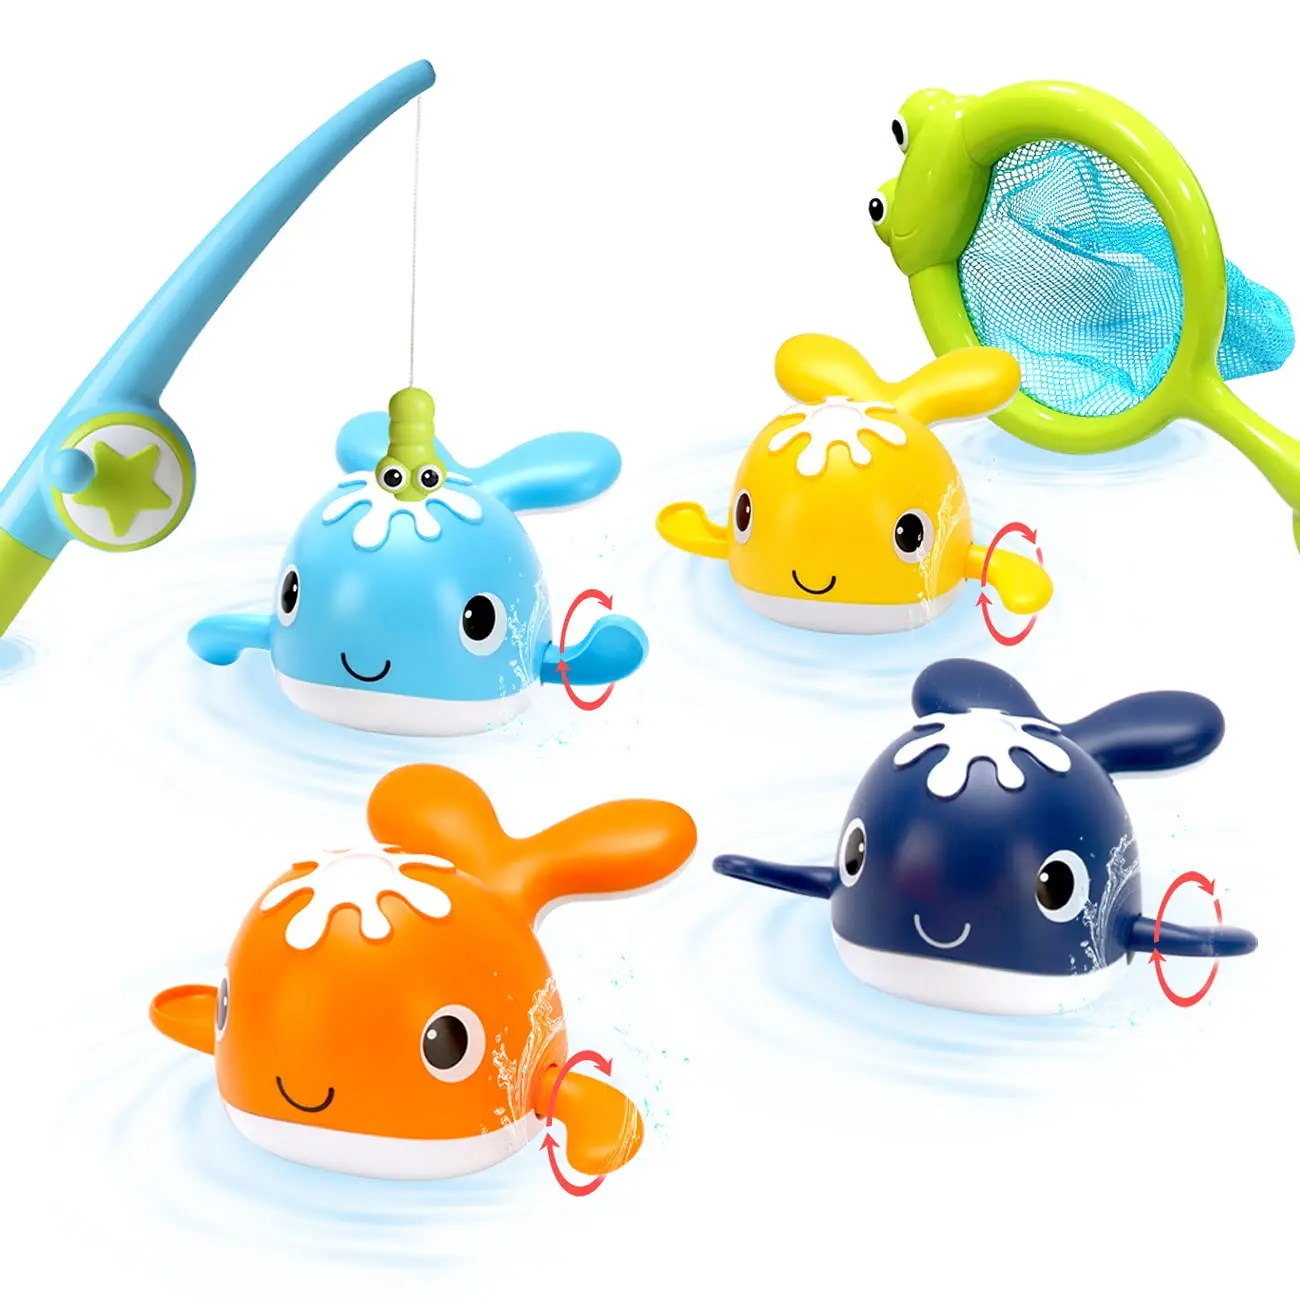 

Kids Toys Magnet Fishing Fishing Wind-up Whales Tub Pole Baby Net for Set Toy Swimming Bathtub Toys Fishing Game with Water Bath